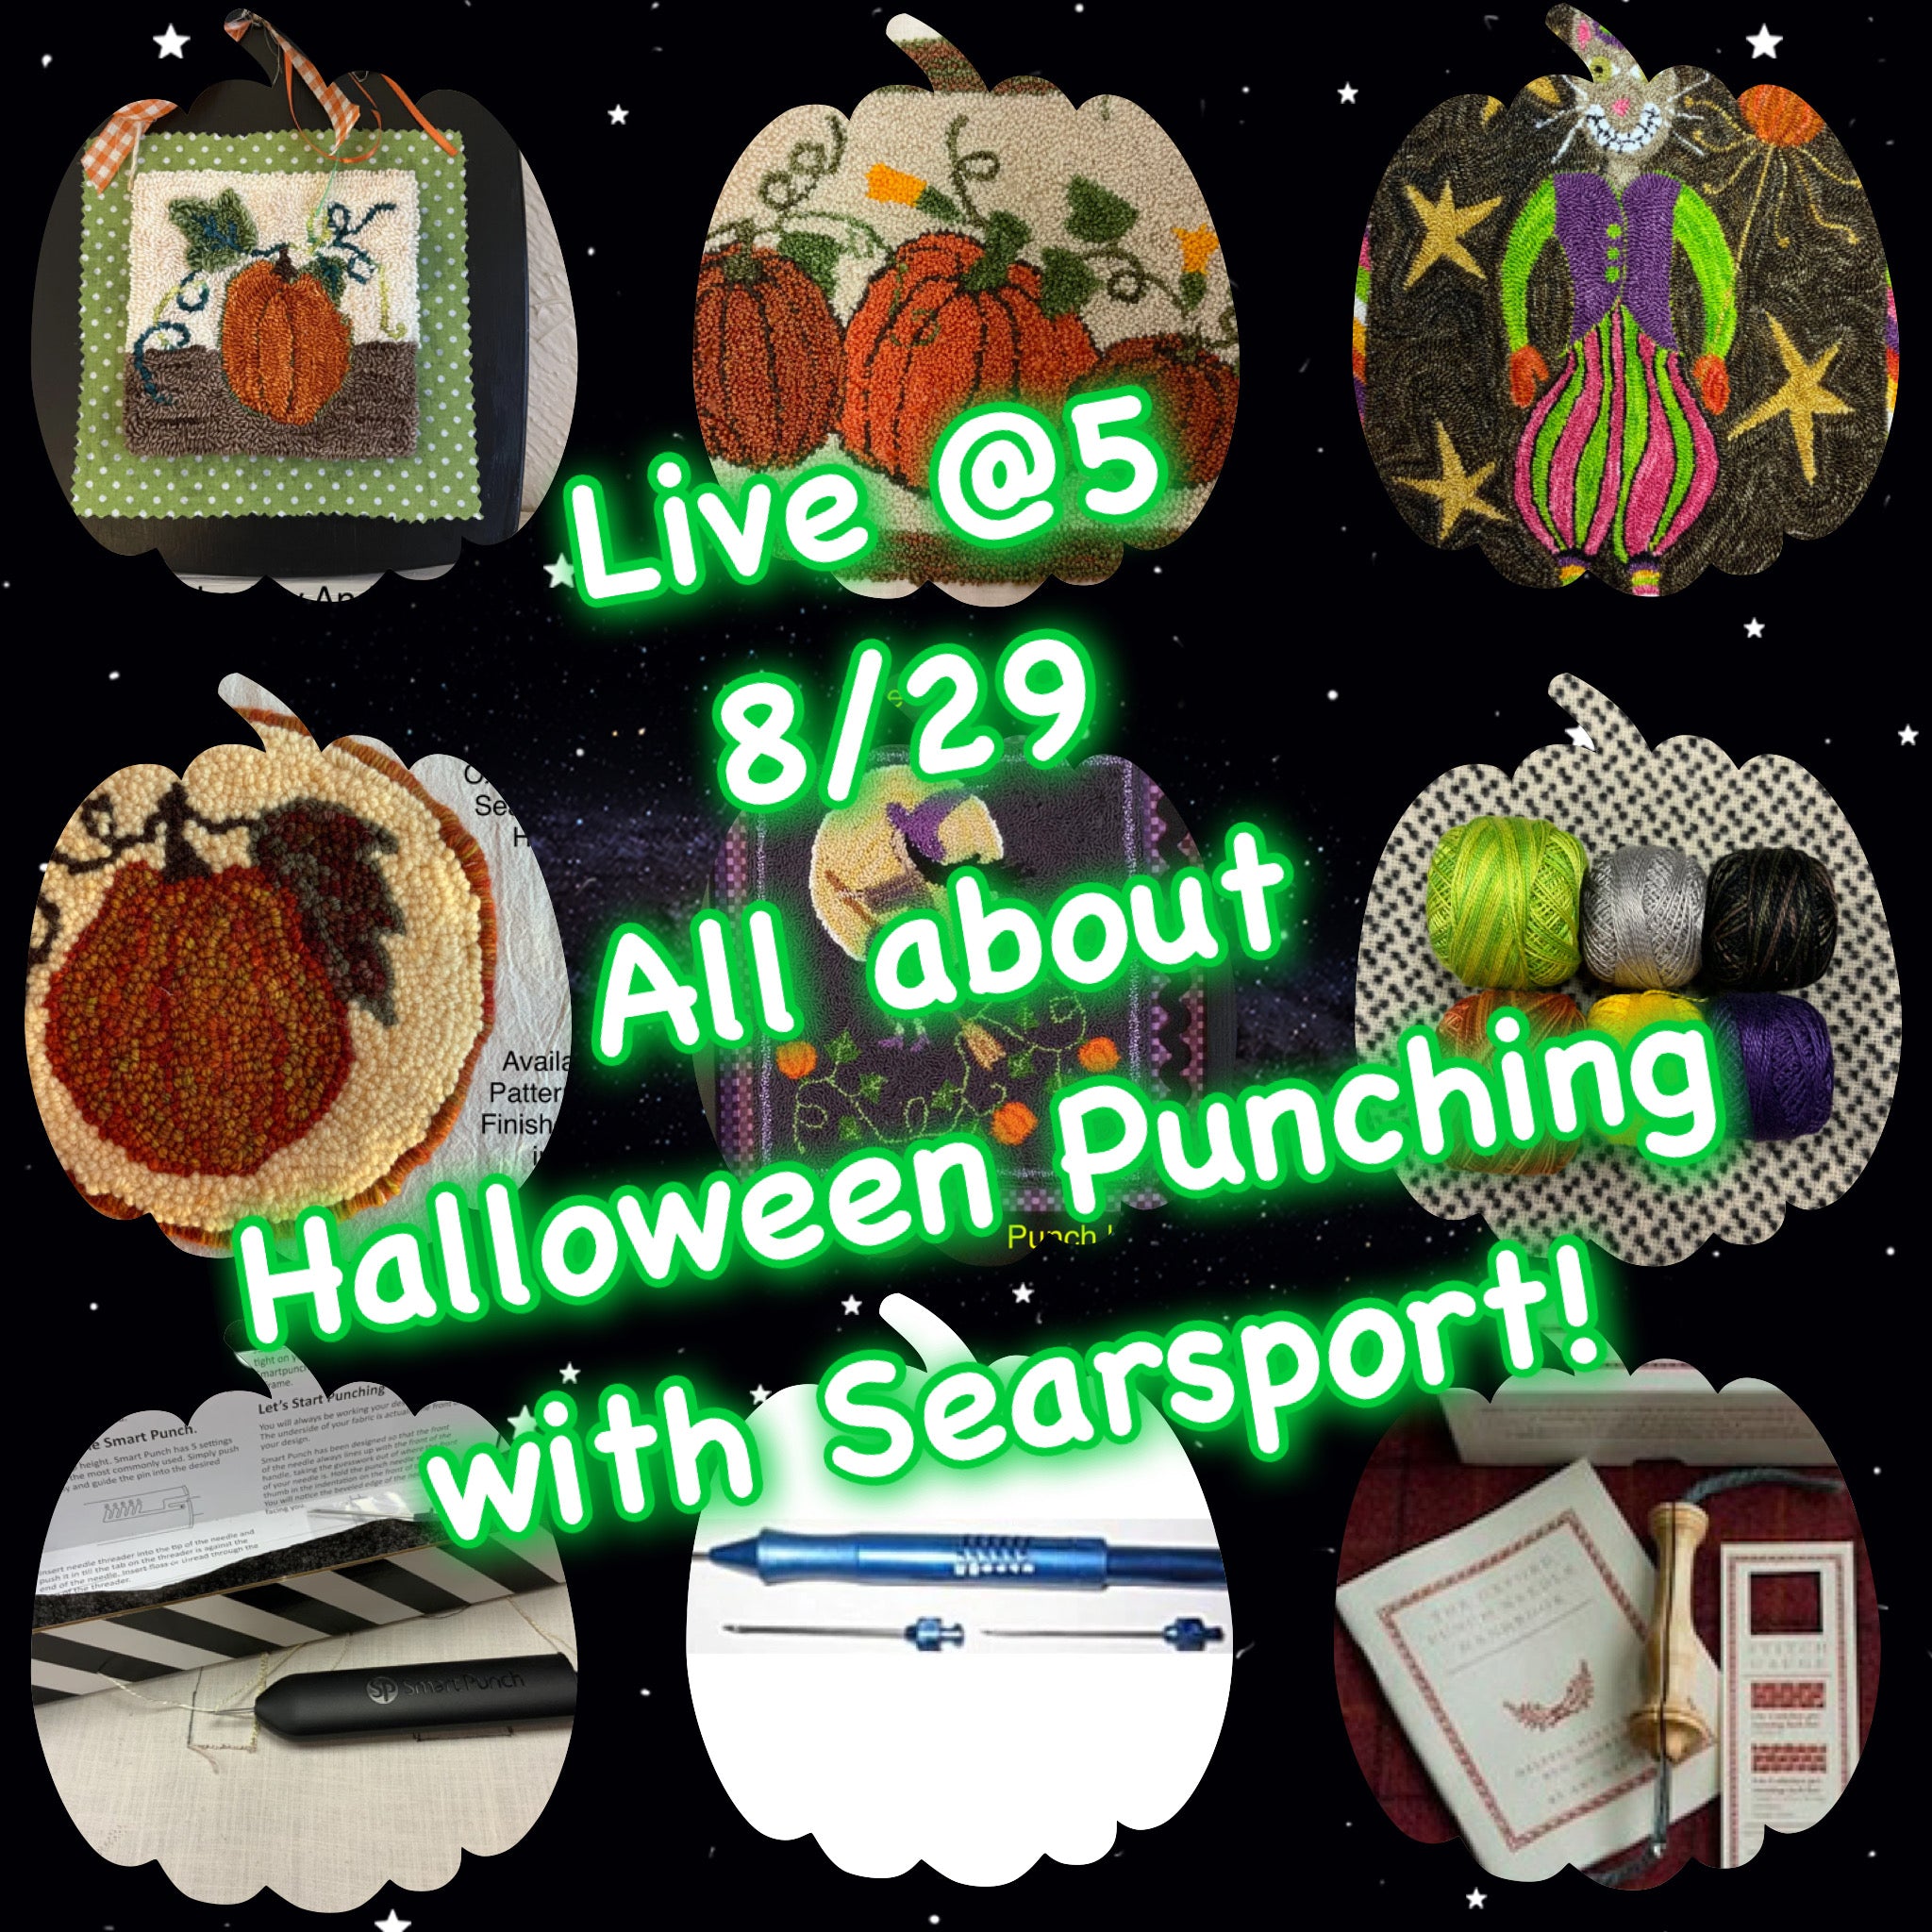 Punching for Halloween Live 5 o’clock THURSDAY